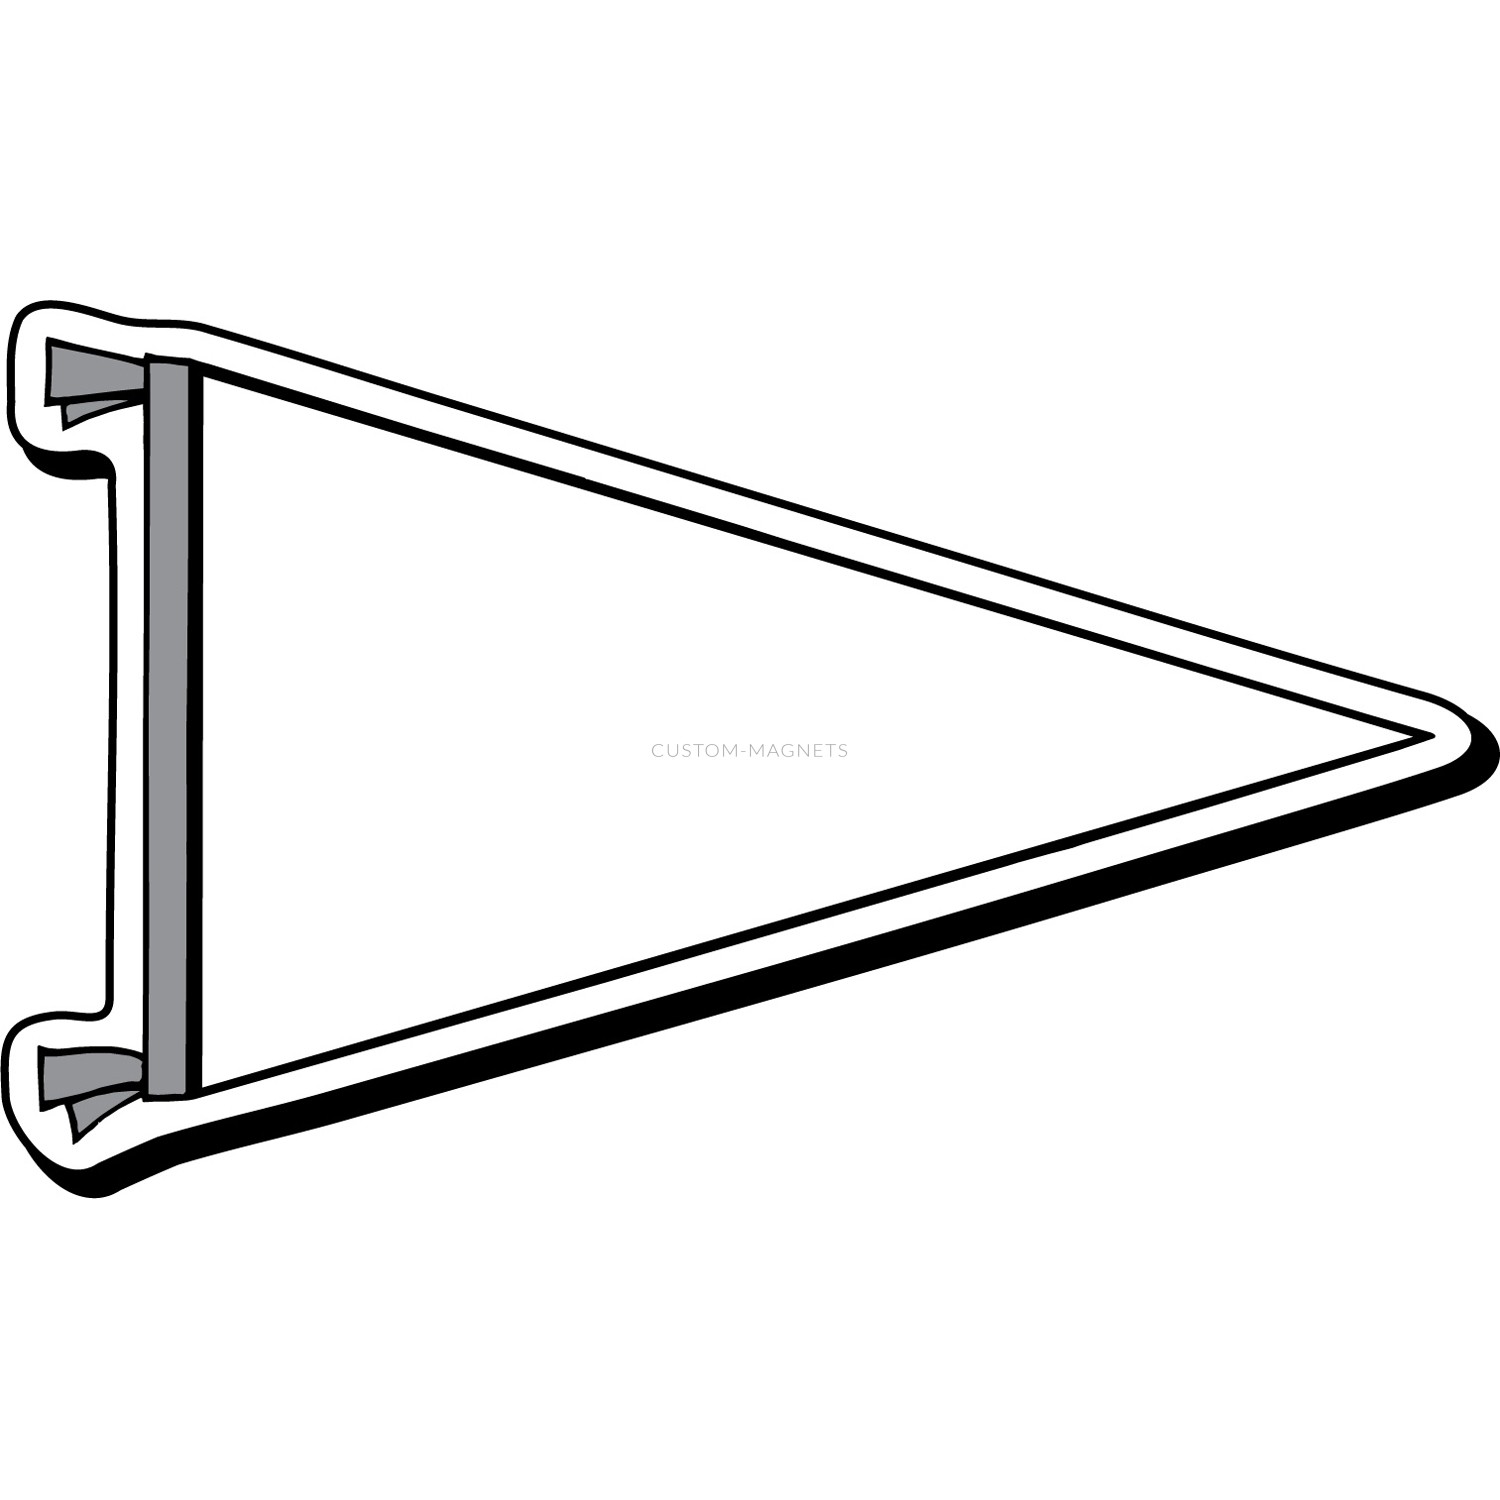 Free Blank Pennant Cliparts, Download Free Clip Art, Free